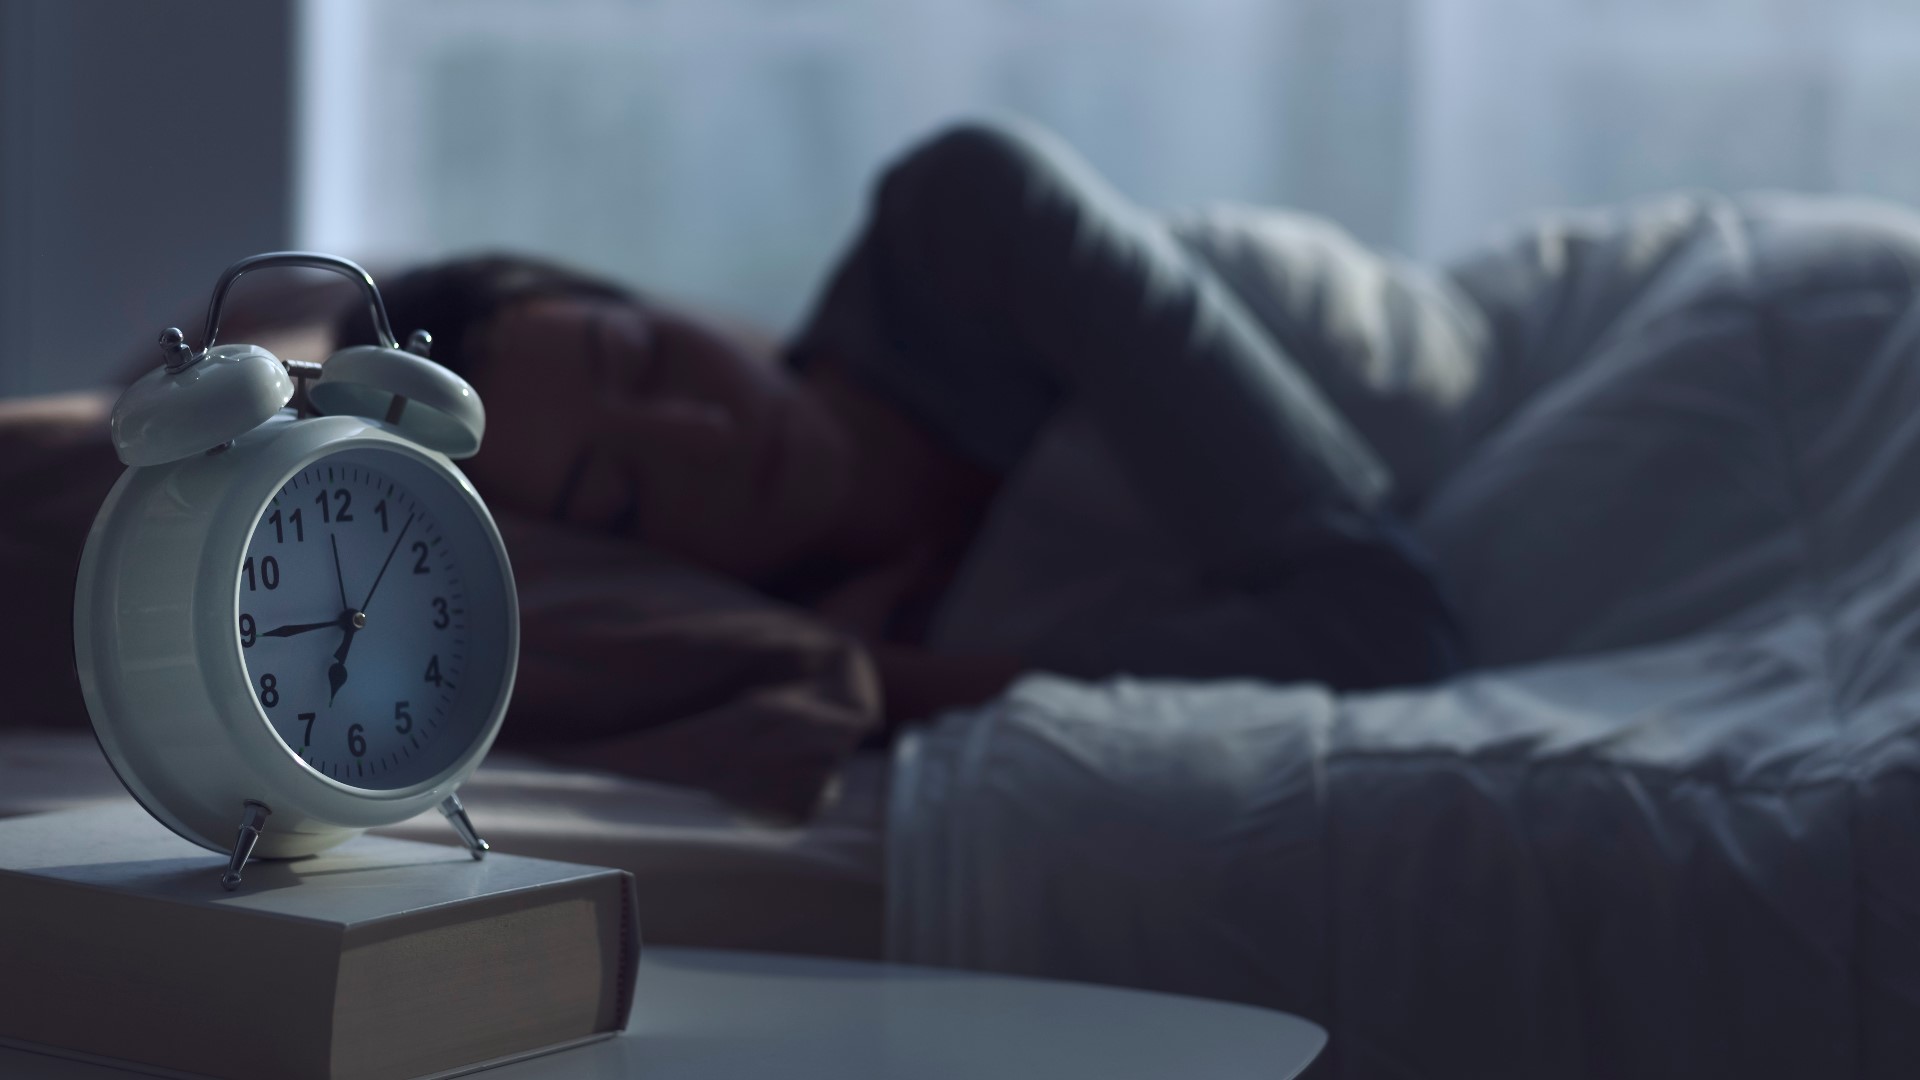 This study went a step further than the duration of sleep, instead looking at a number of sleep patterns that could impact a person's lifespan.